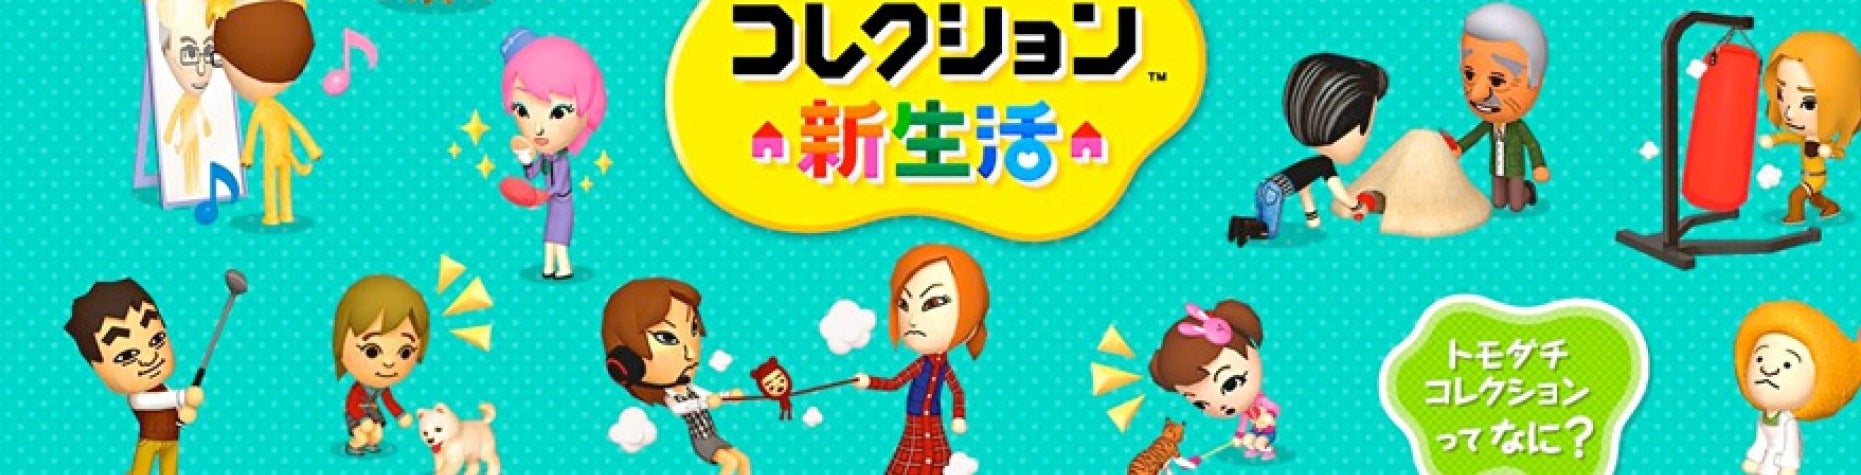 Image for The strange, starry distraction of Tomodachi Life